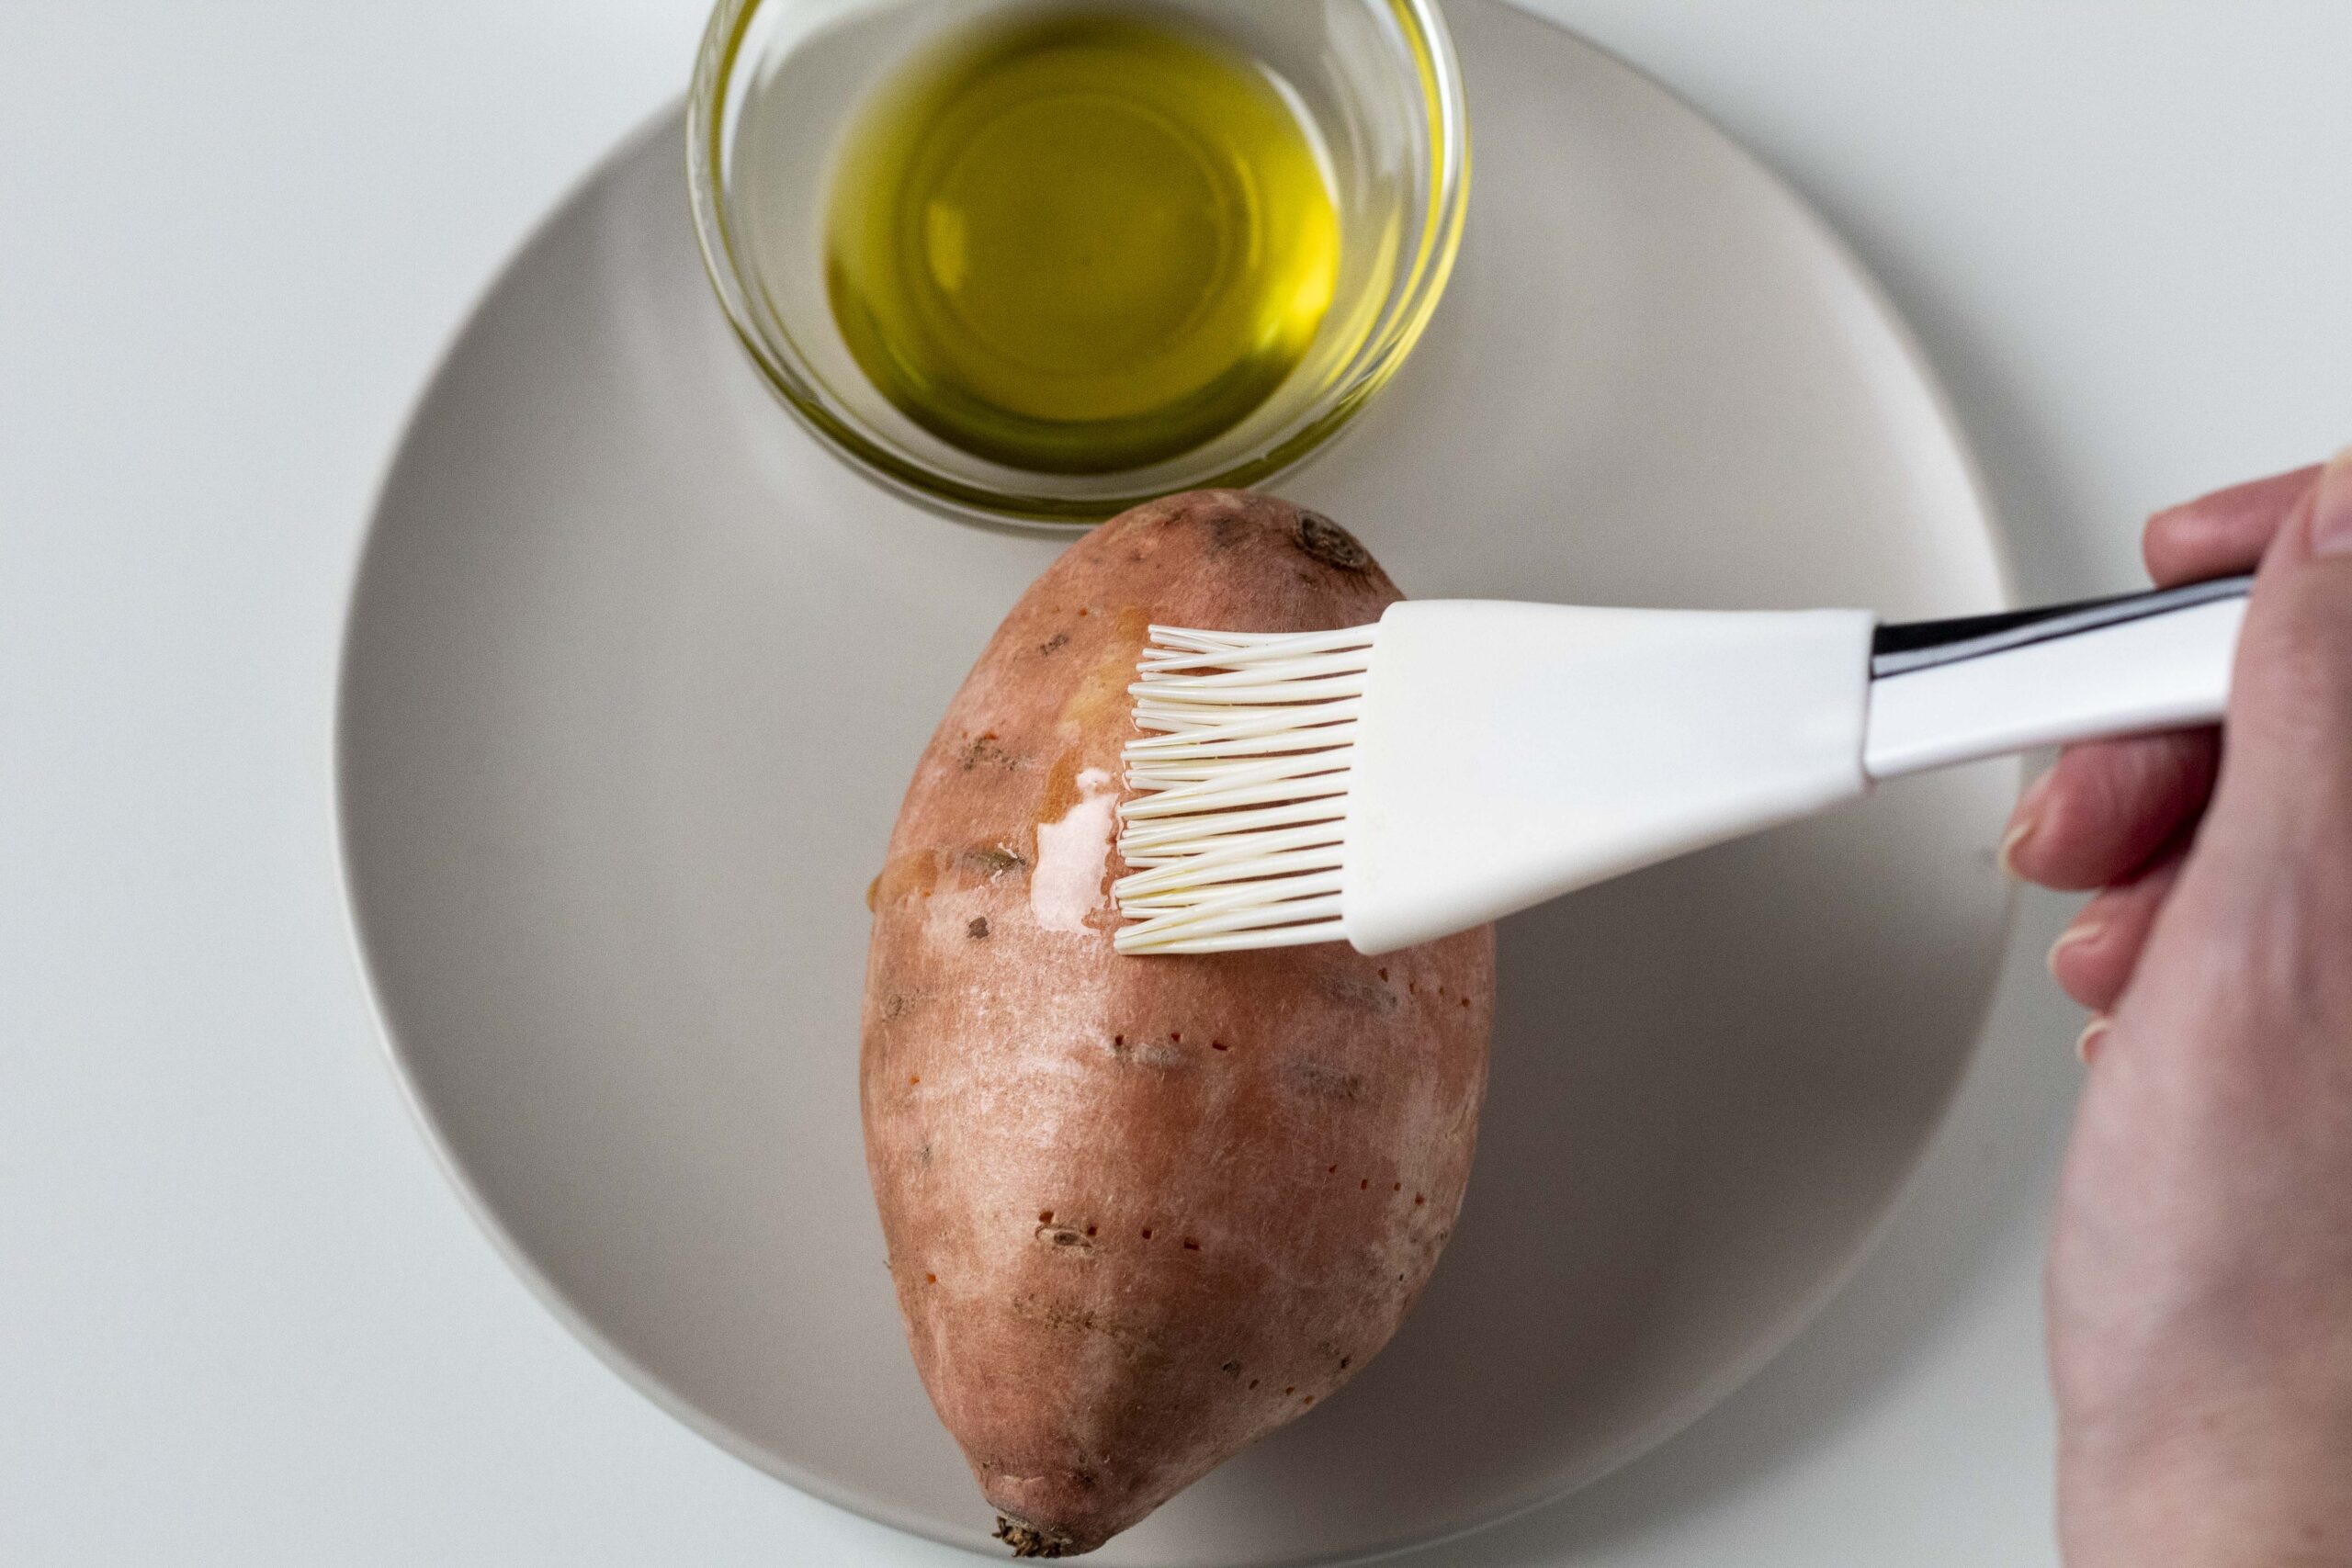 Hand brushing sweet potato with olive oil.